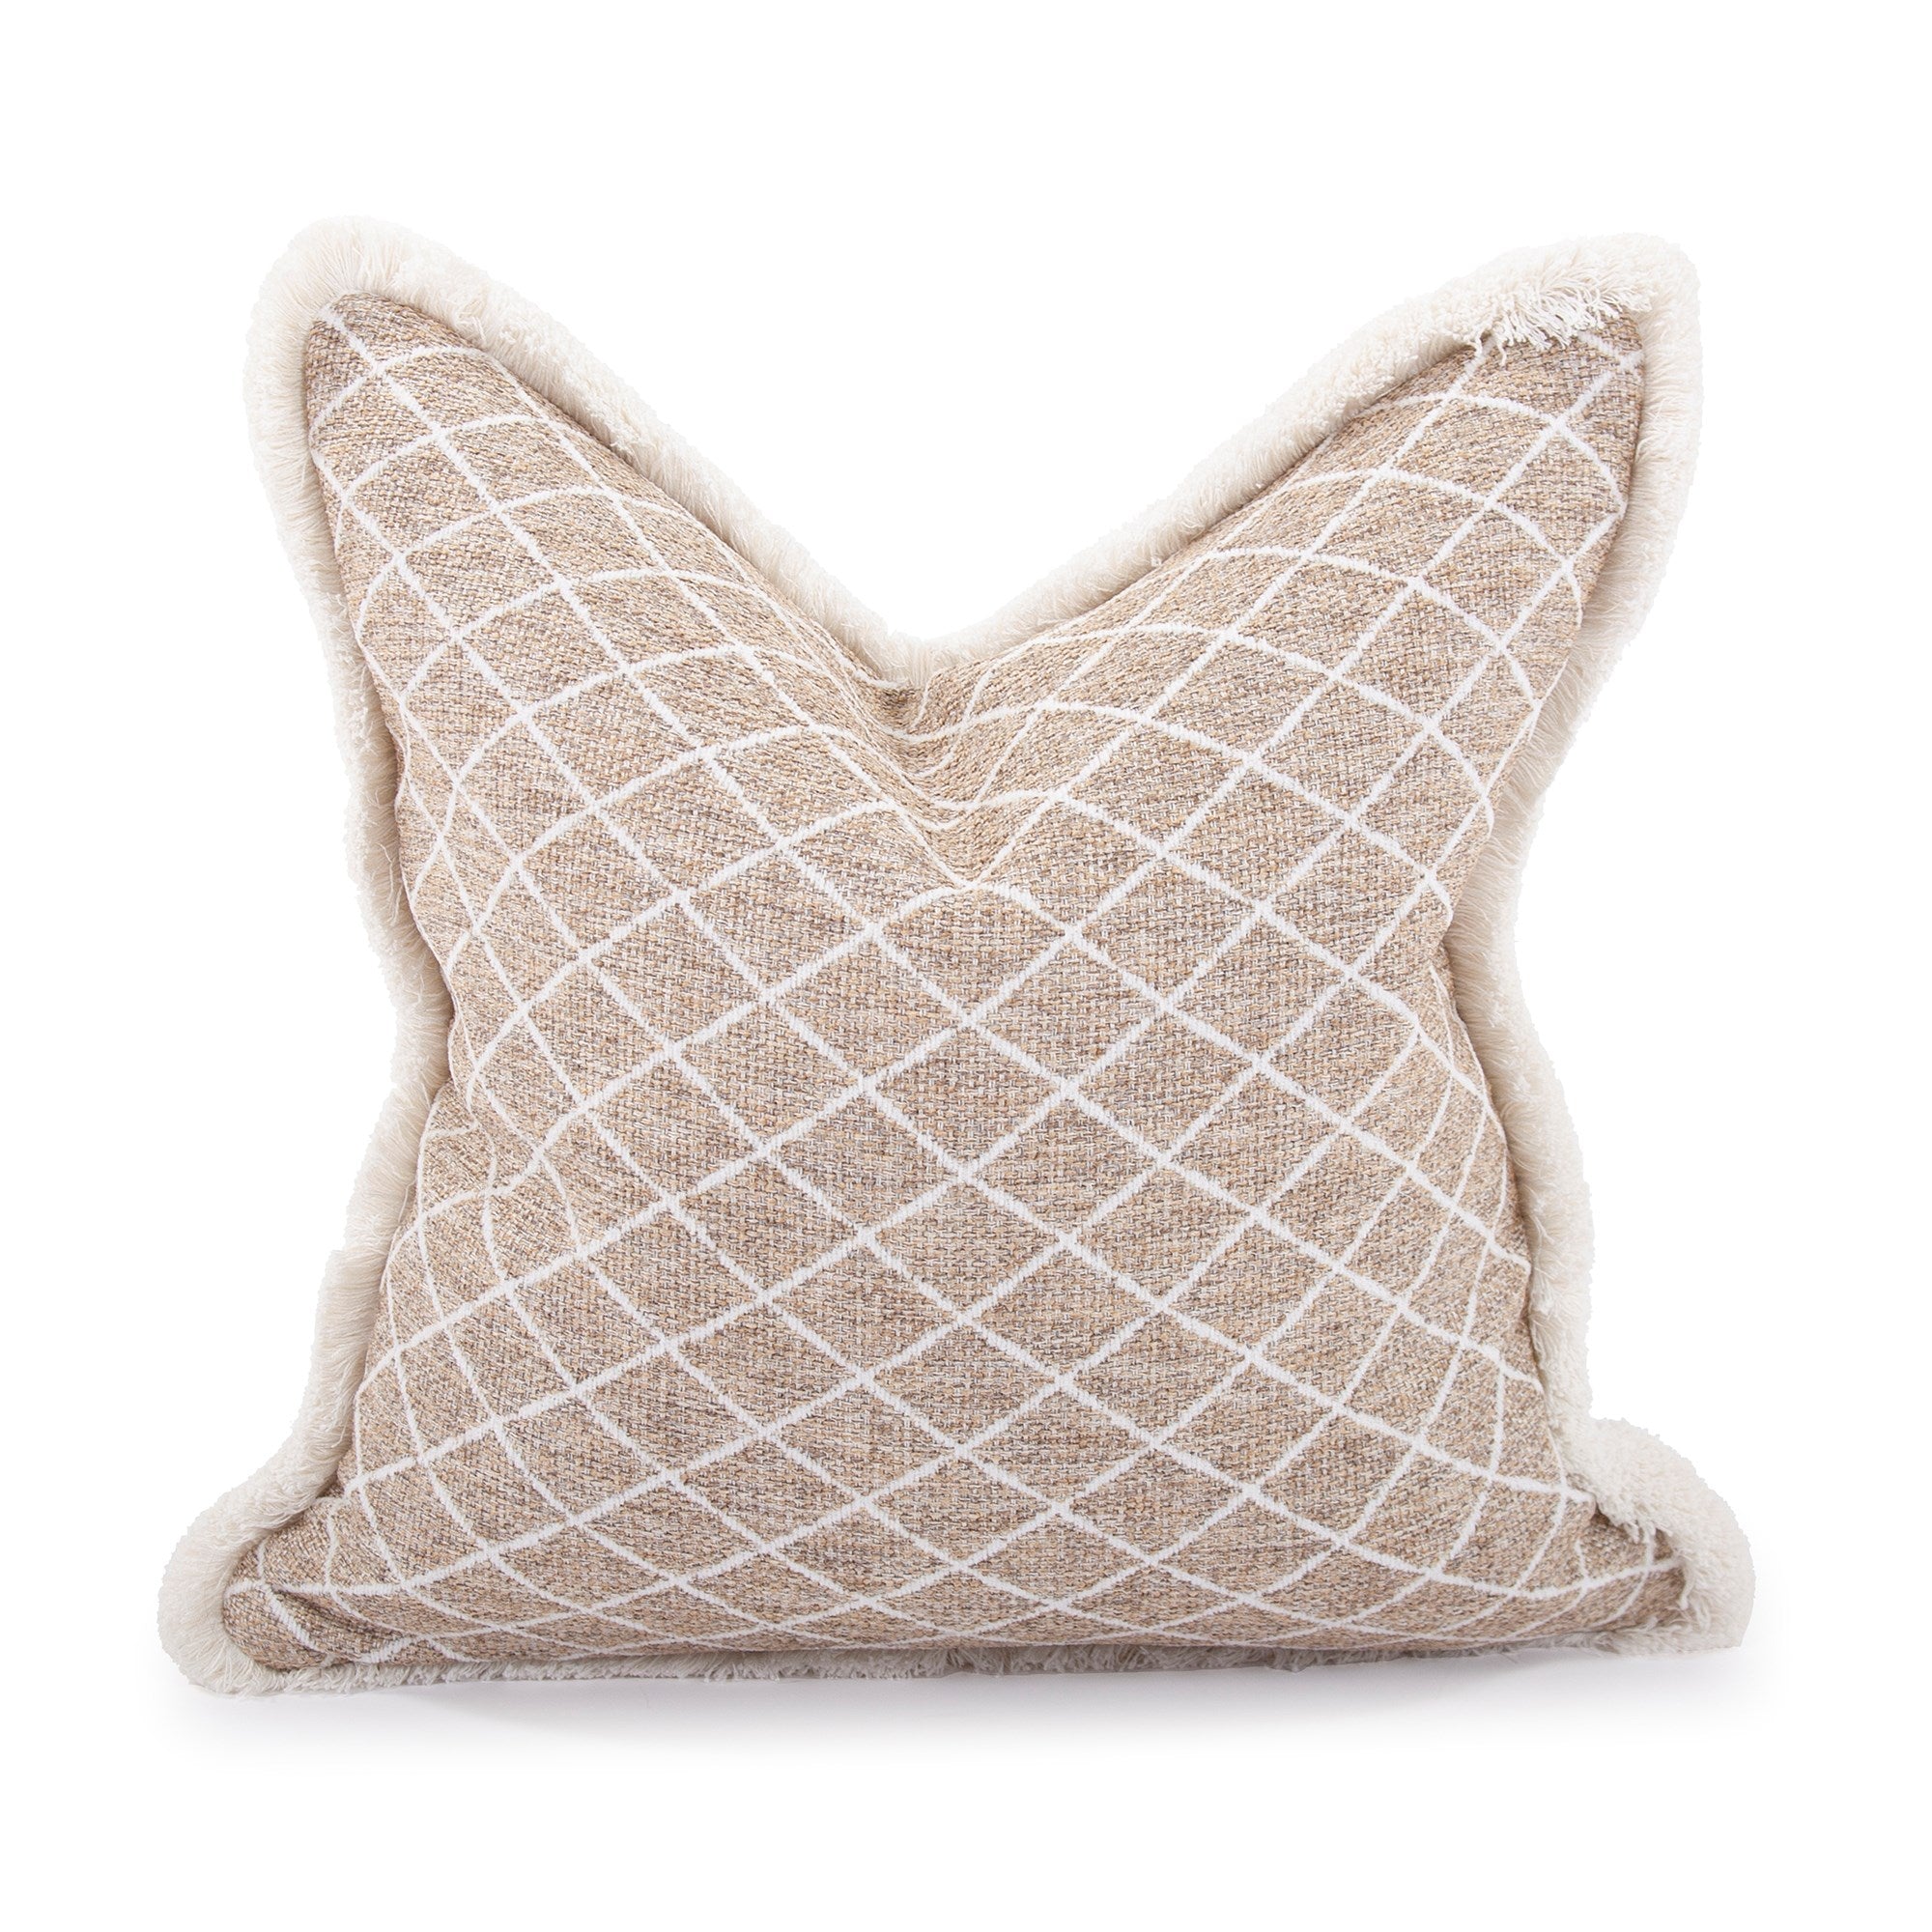 Grille Natural Down Pillow- 20" x 20"